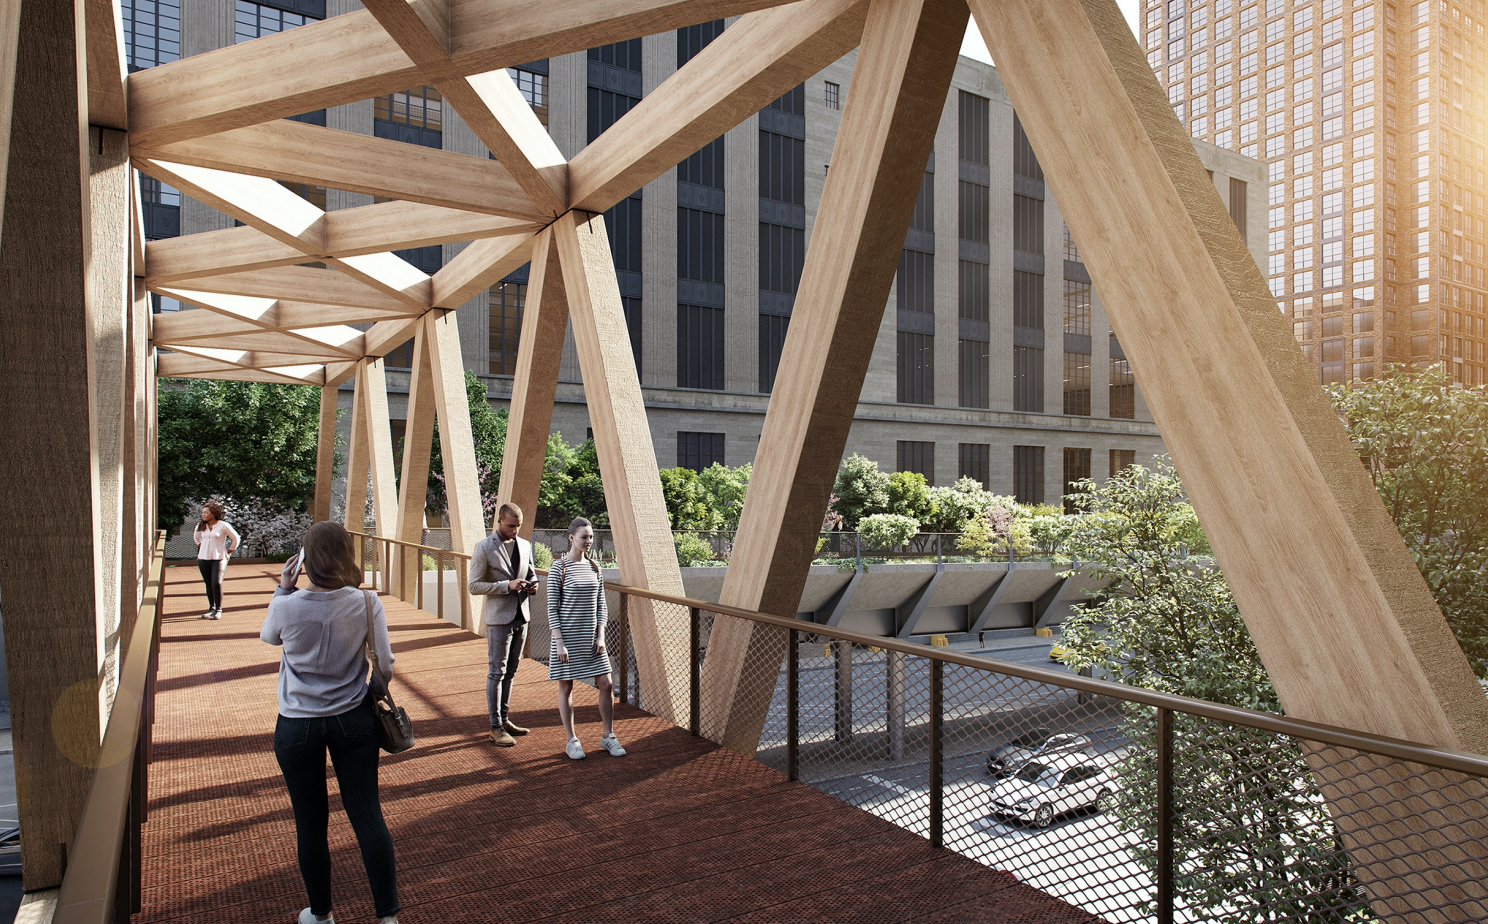 high line extension proposed to connect to new york's penn station